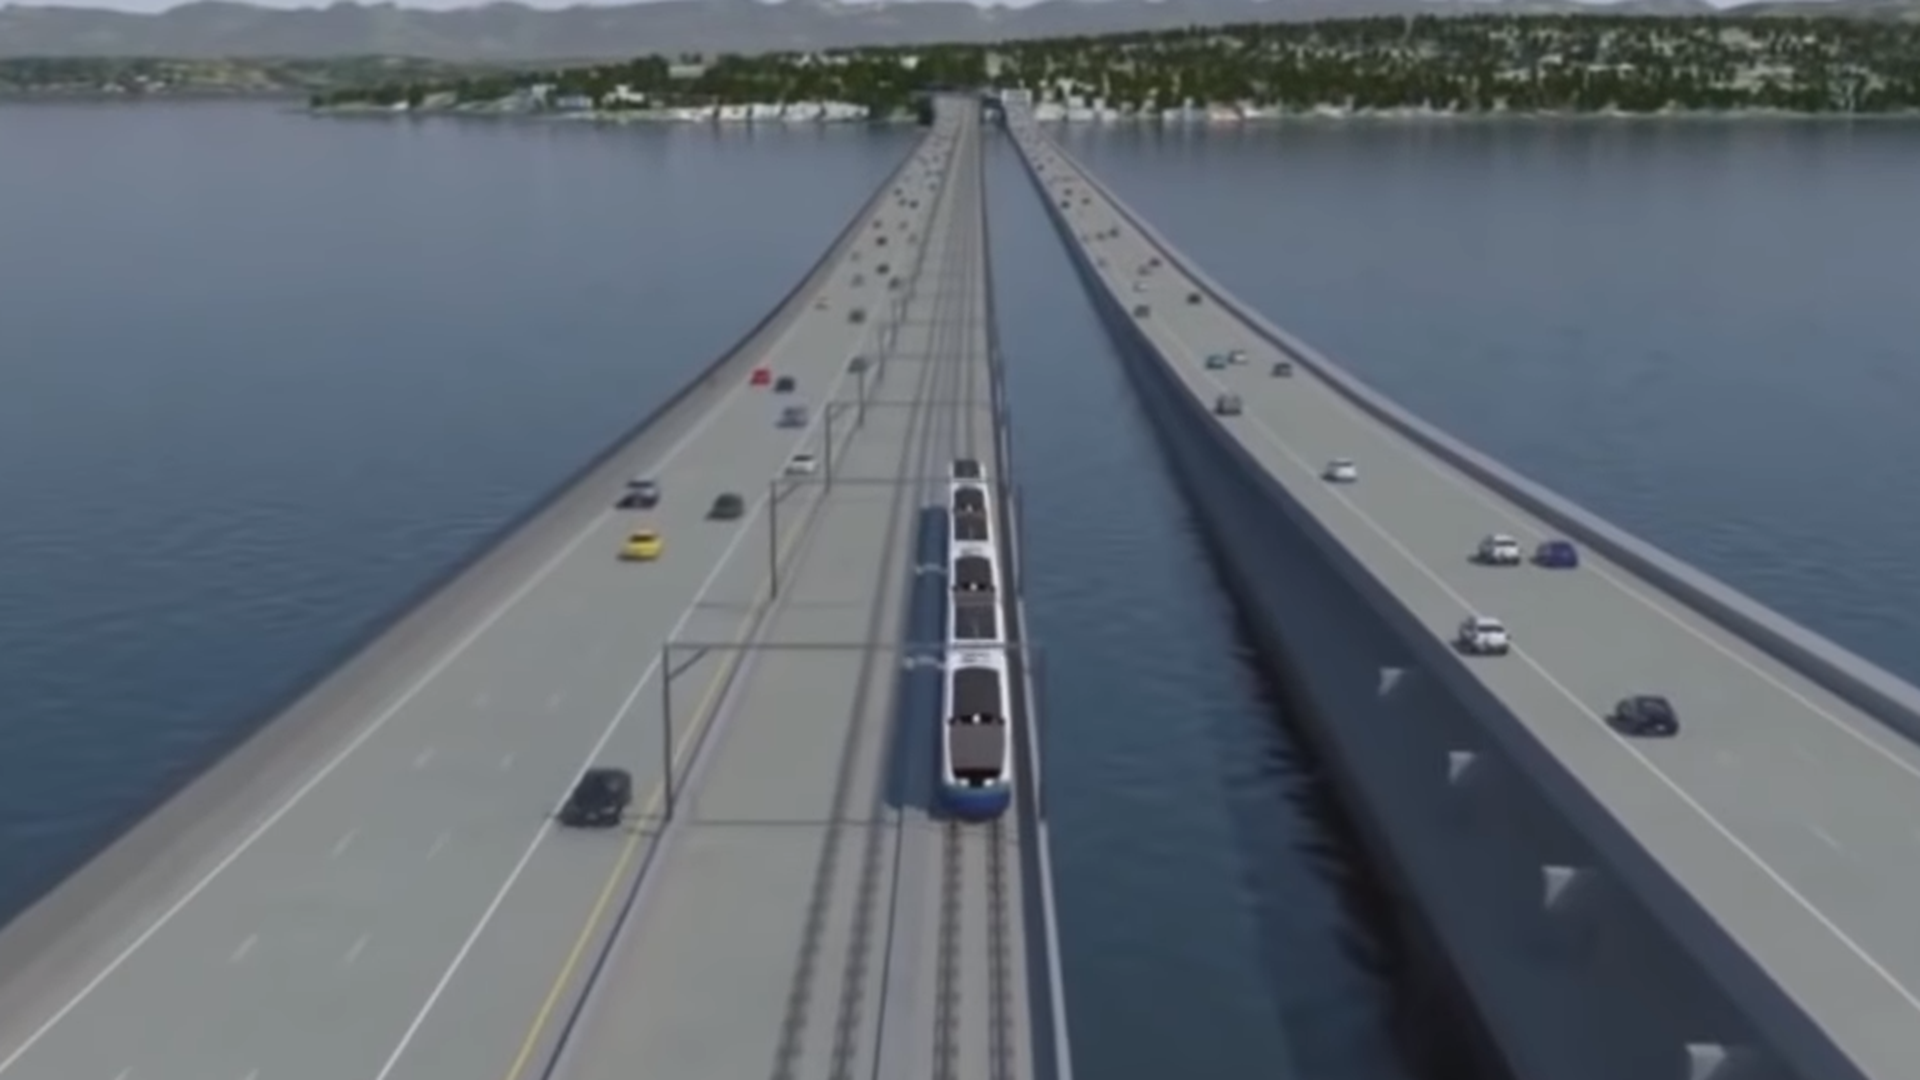 Sound Transit engineer John Sleavin helped develop the light rail track design over the I-90 Floating Bridge, the first of its kind.